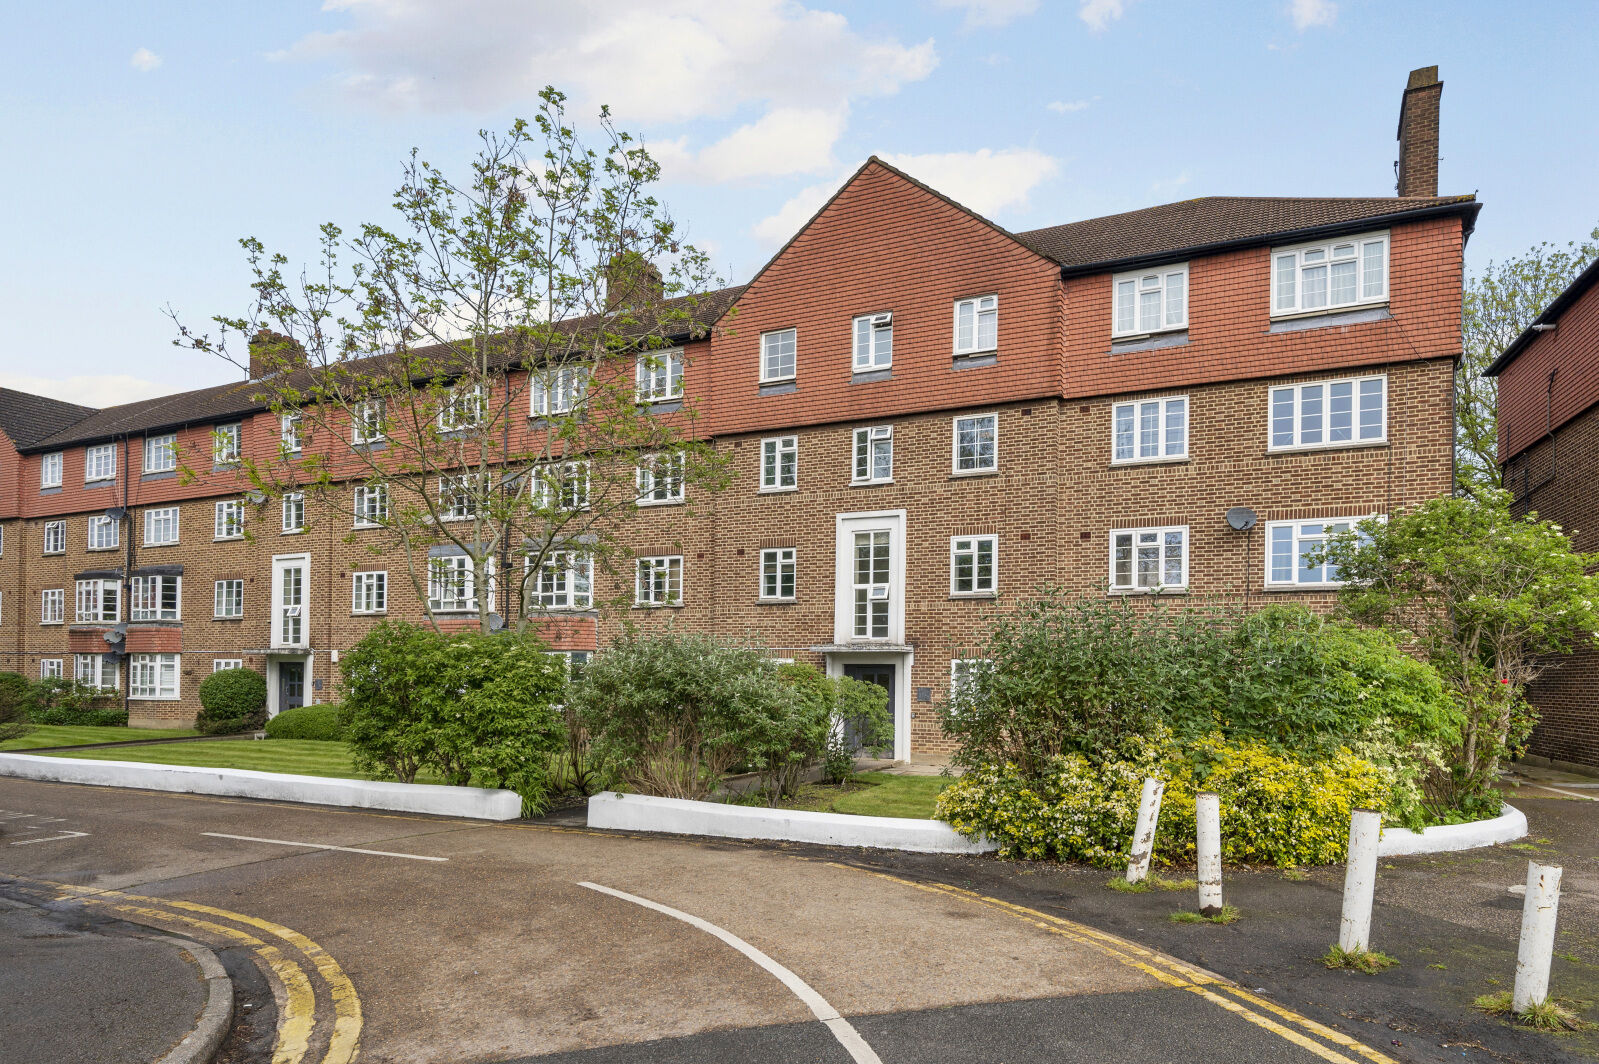 2 bedroom  flat to rent, Available now Bushey Road, London, SW20, main image